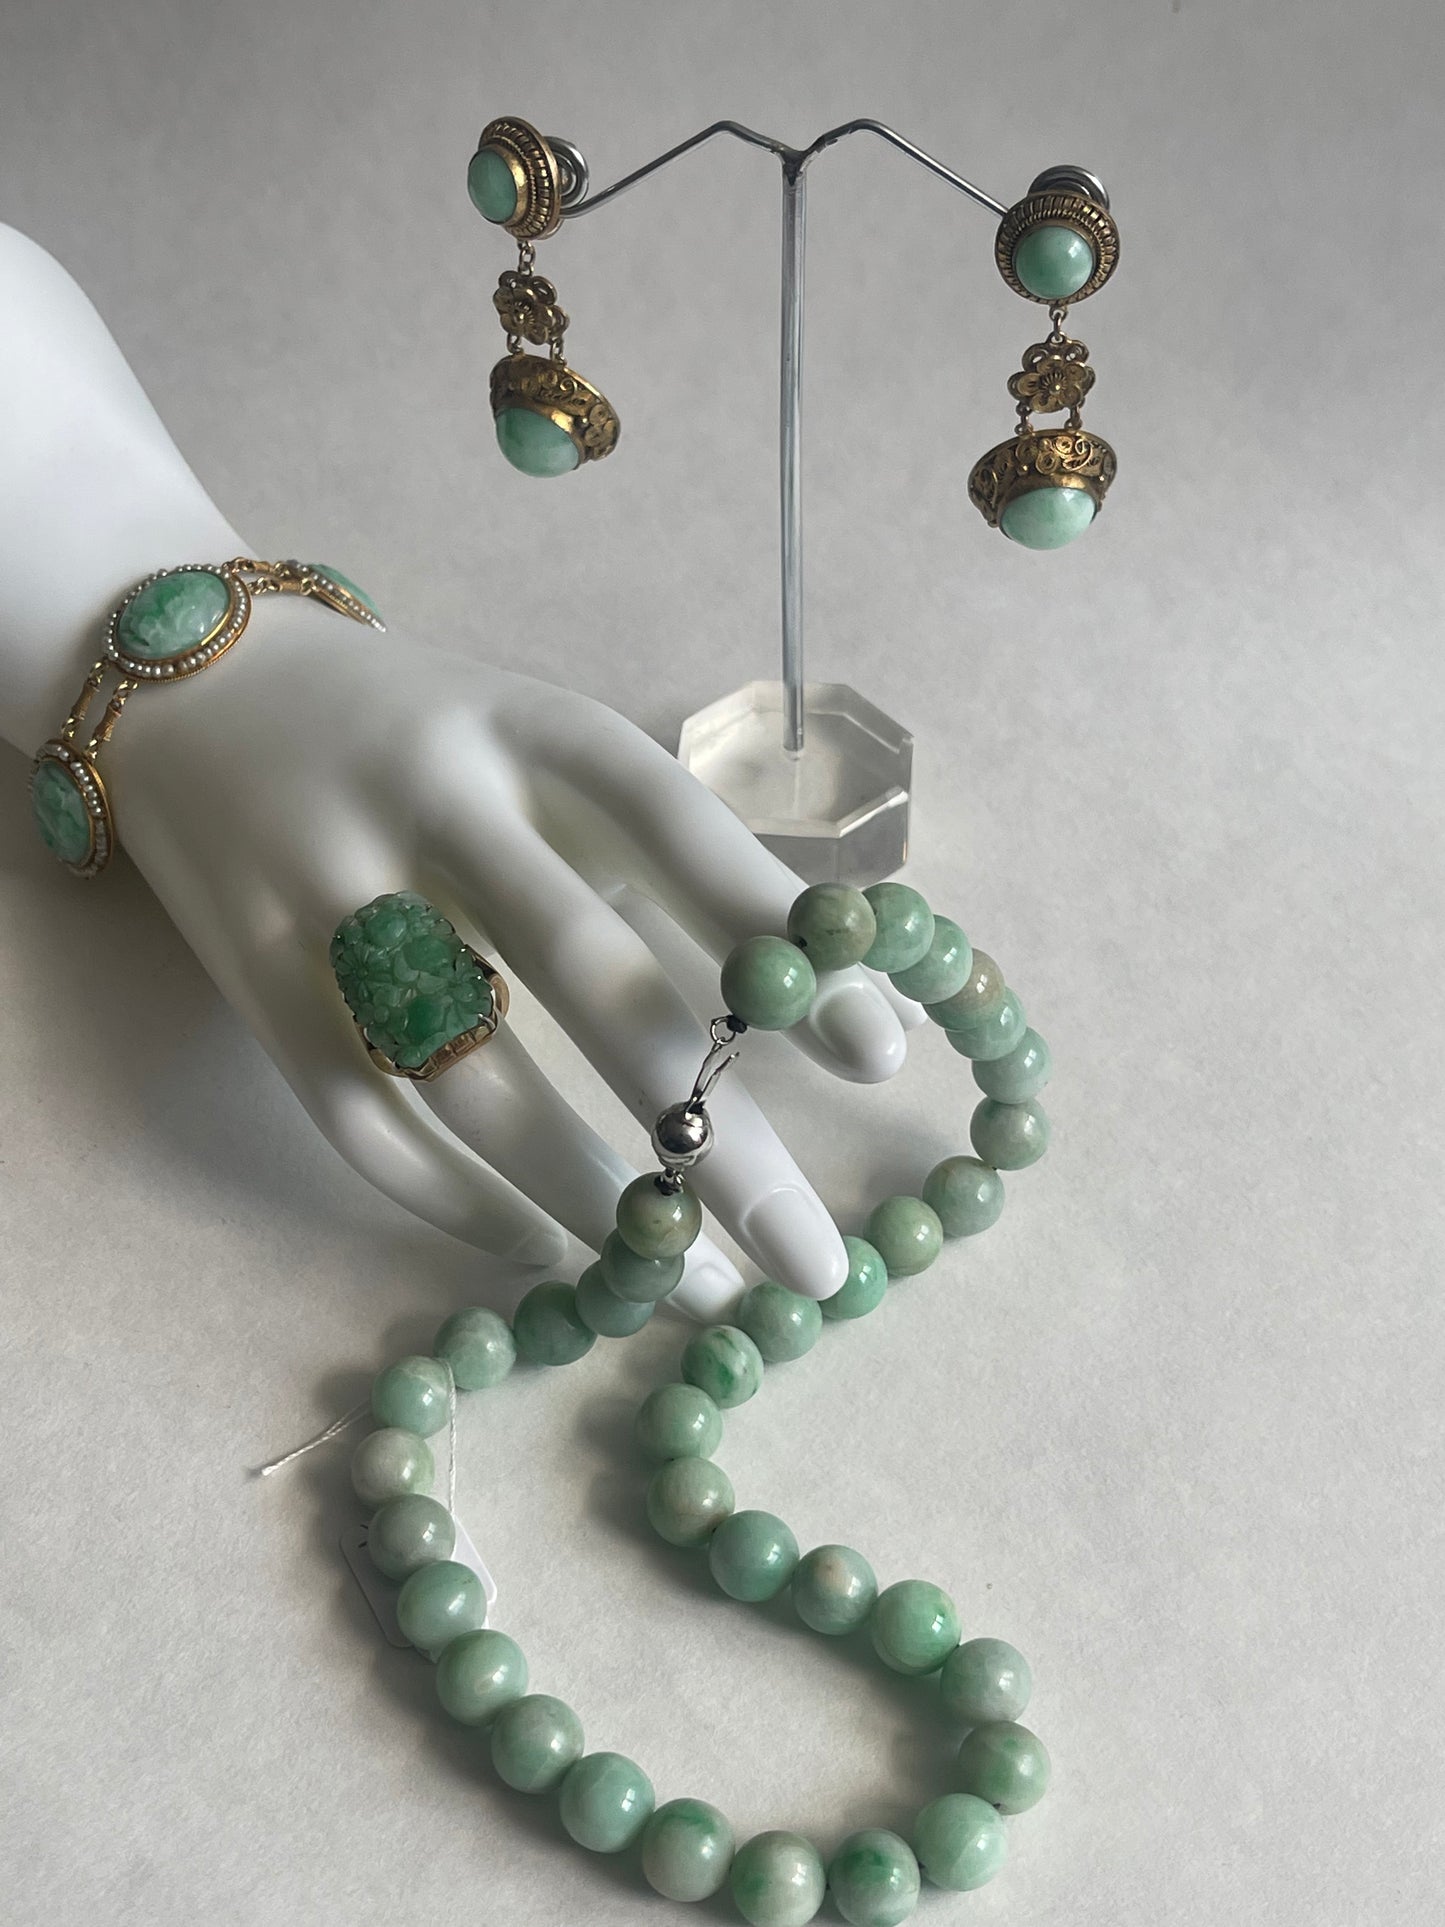 A necklace with vintage jade beads